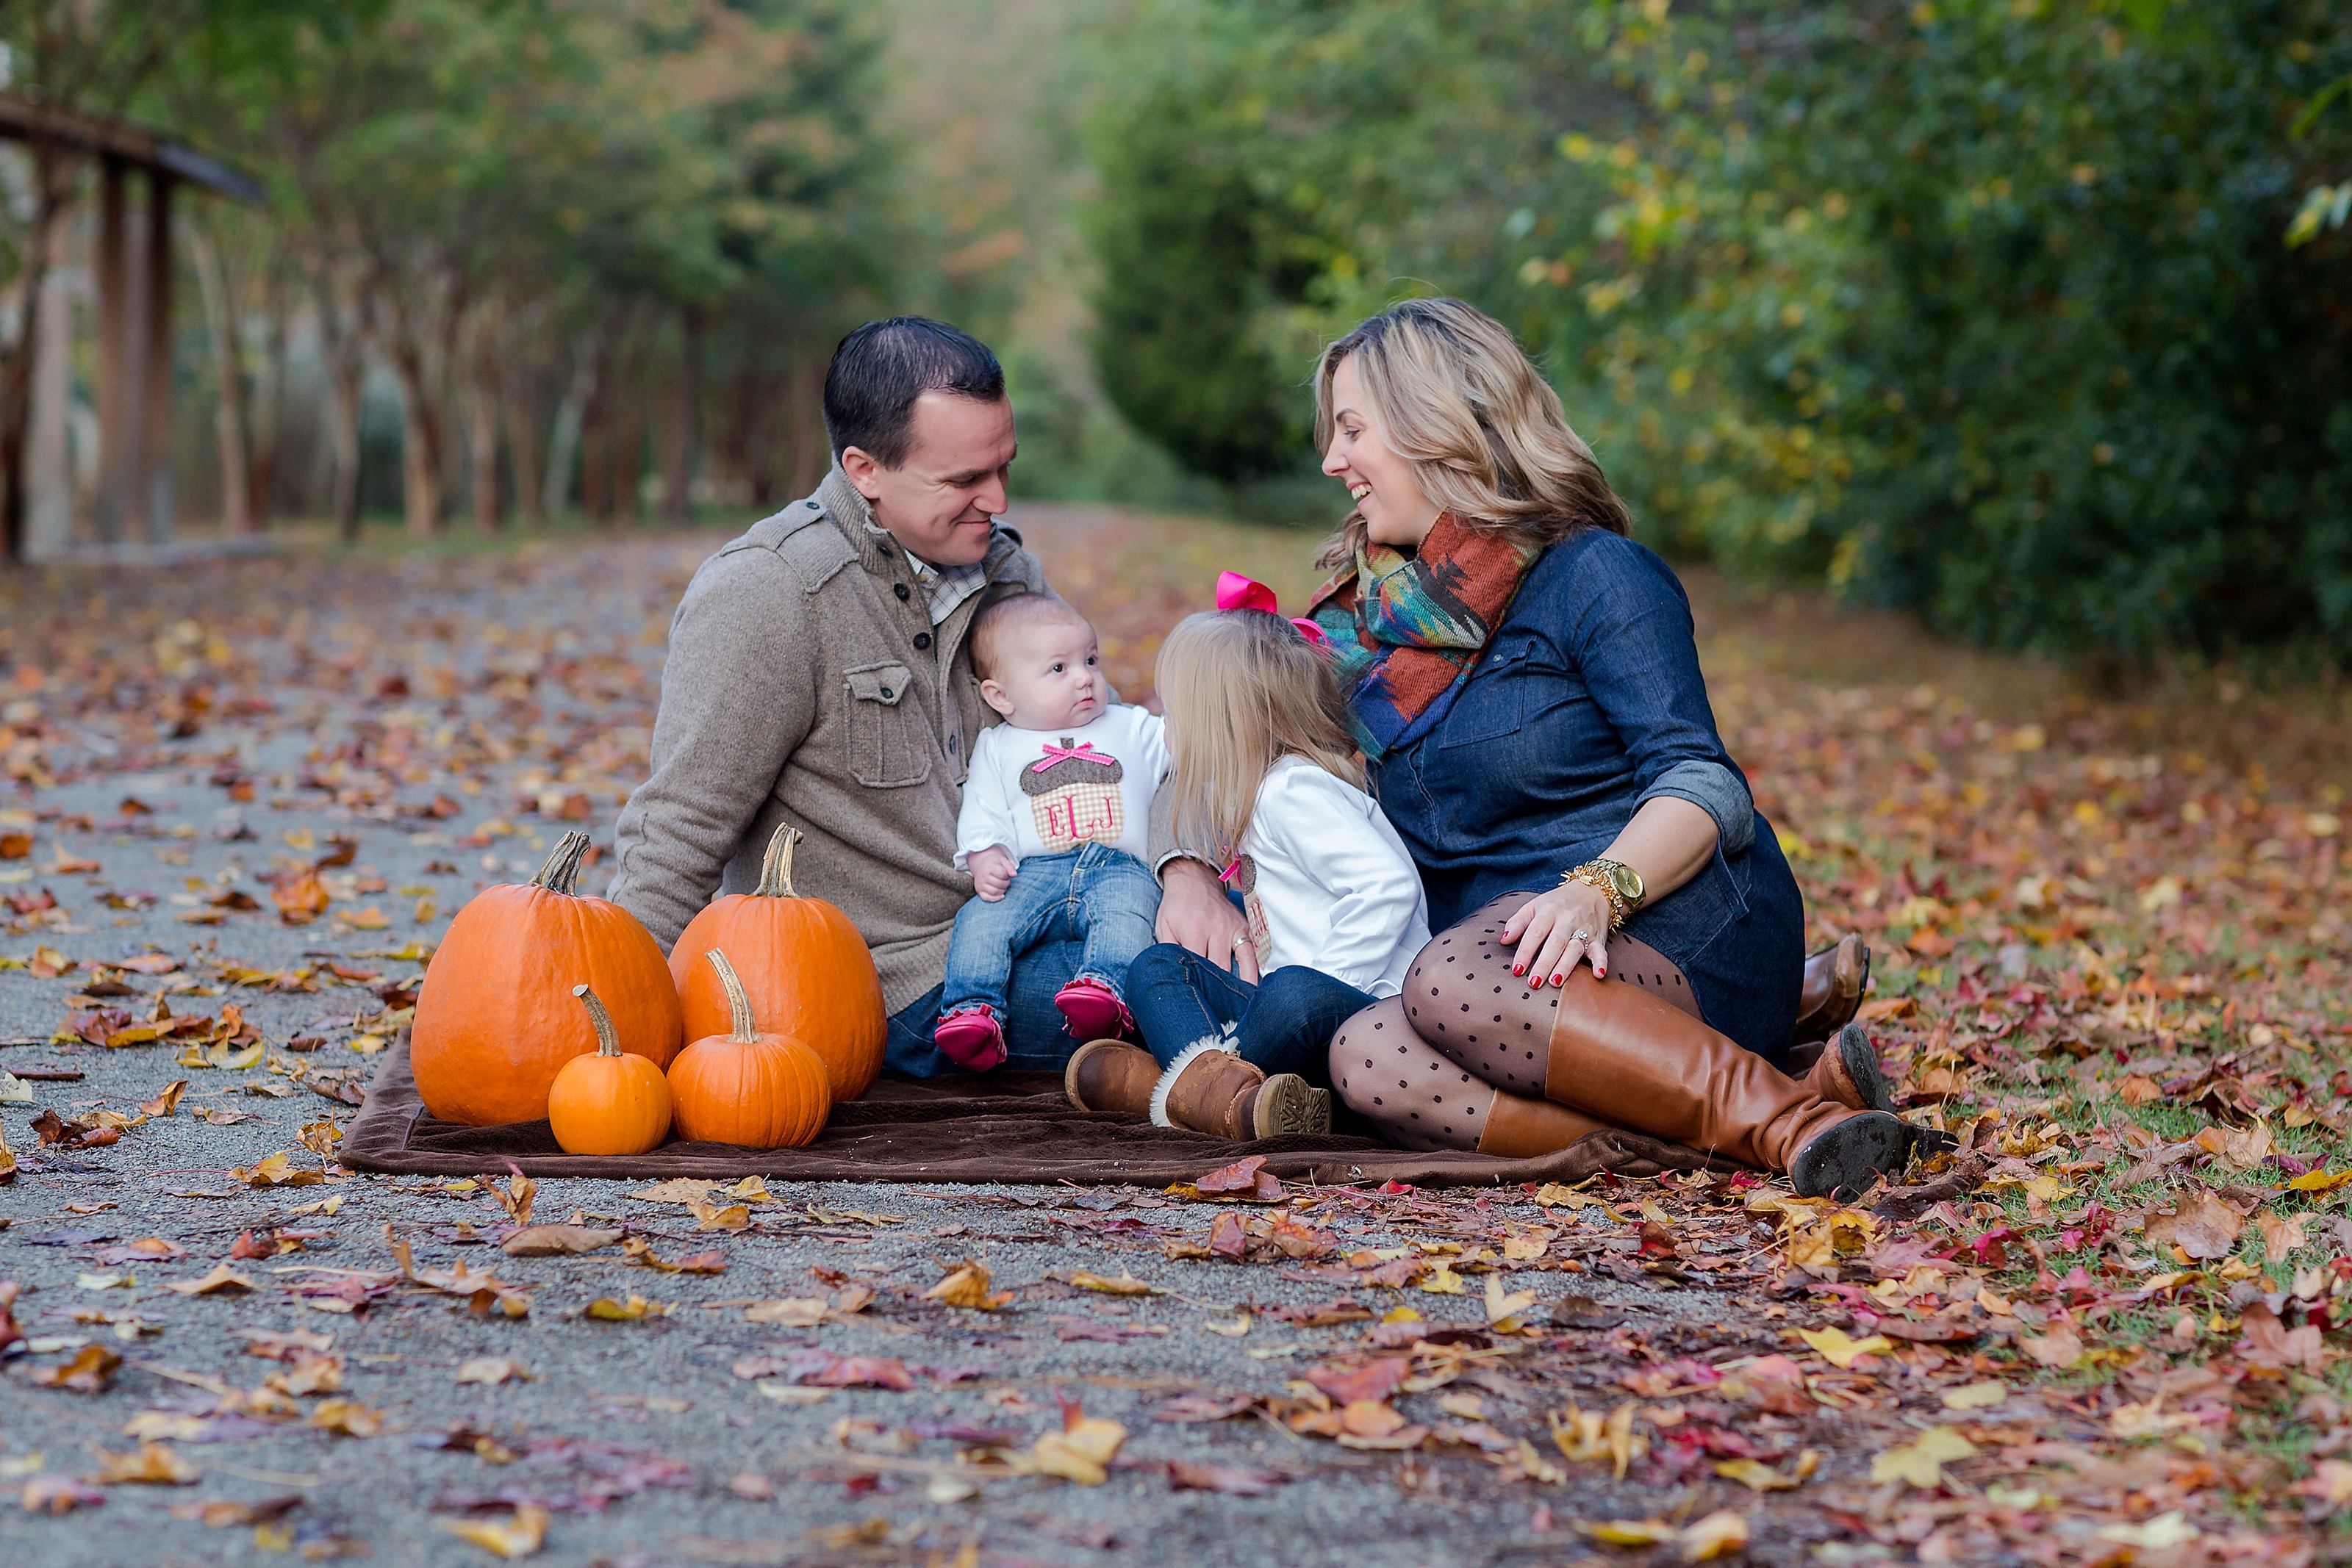 Beautiful Fall Inspired Family Photography